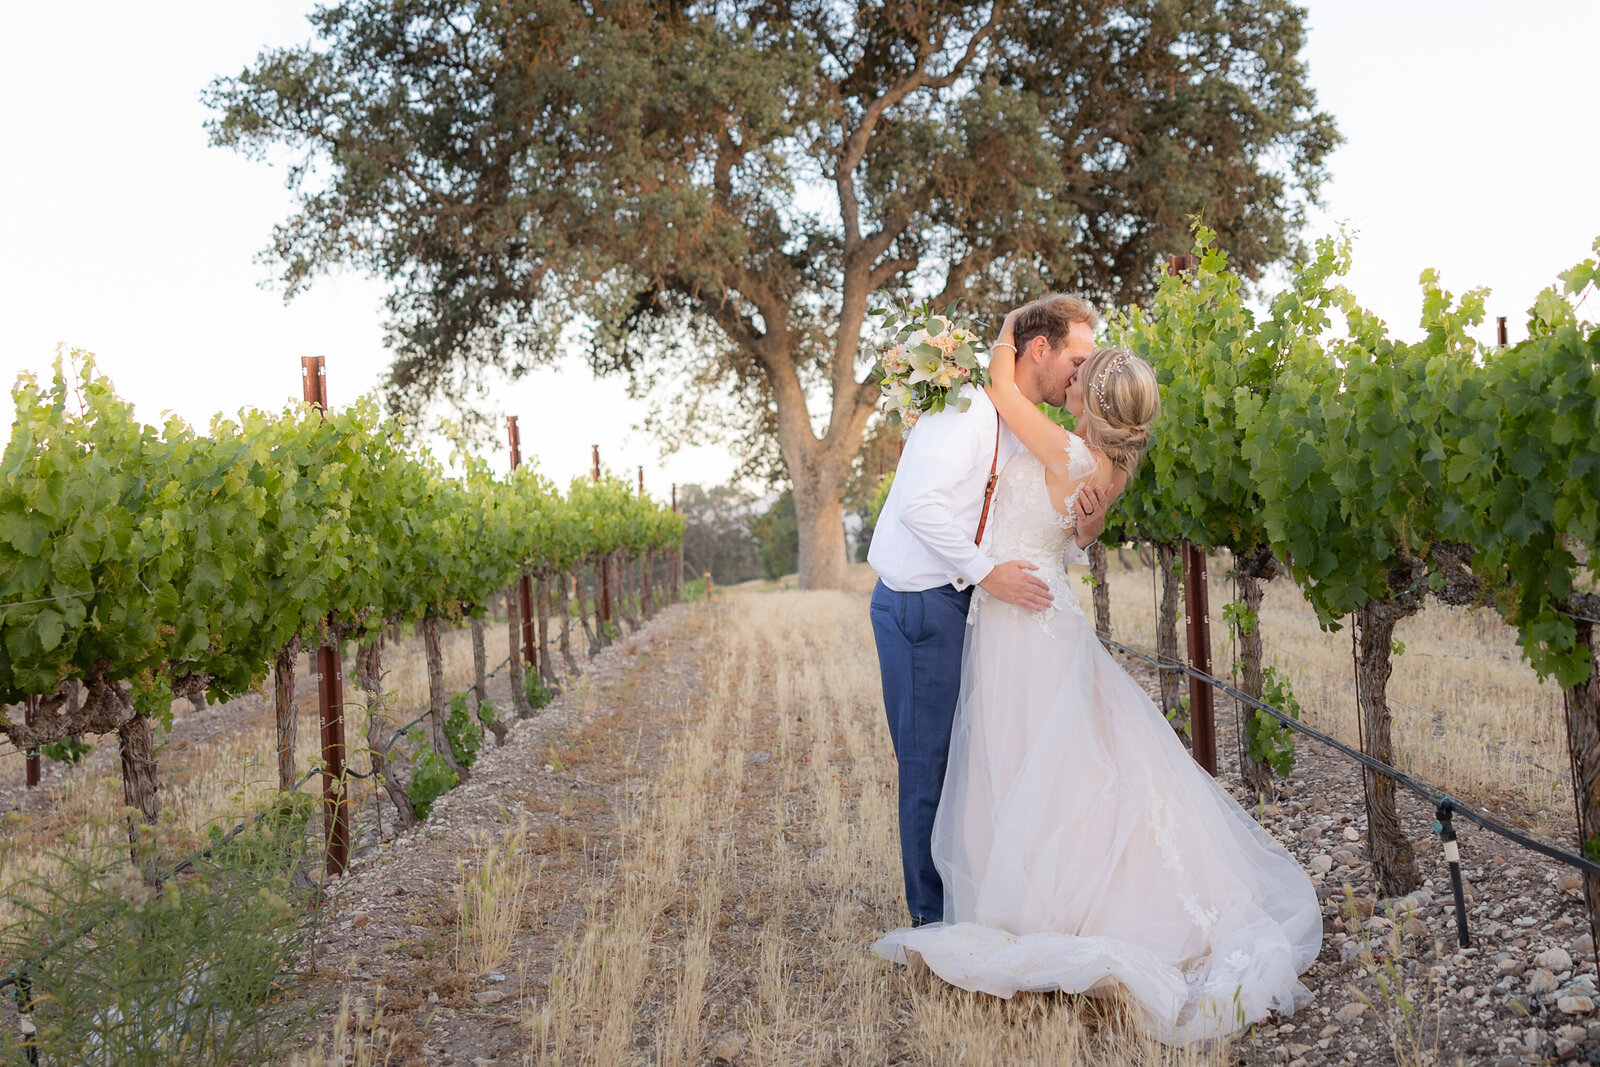 Bride and groom kiss after wedding ceremony in the middle of a vineyard with large tree in the background. Photo by wedding photographer sacramento ca, philippe studio pro